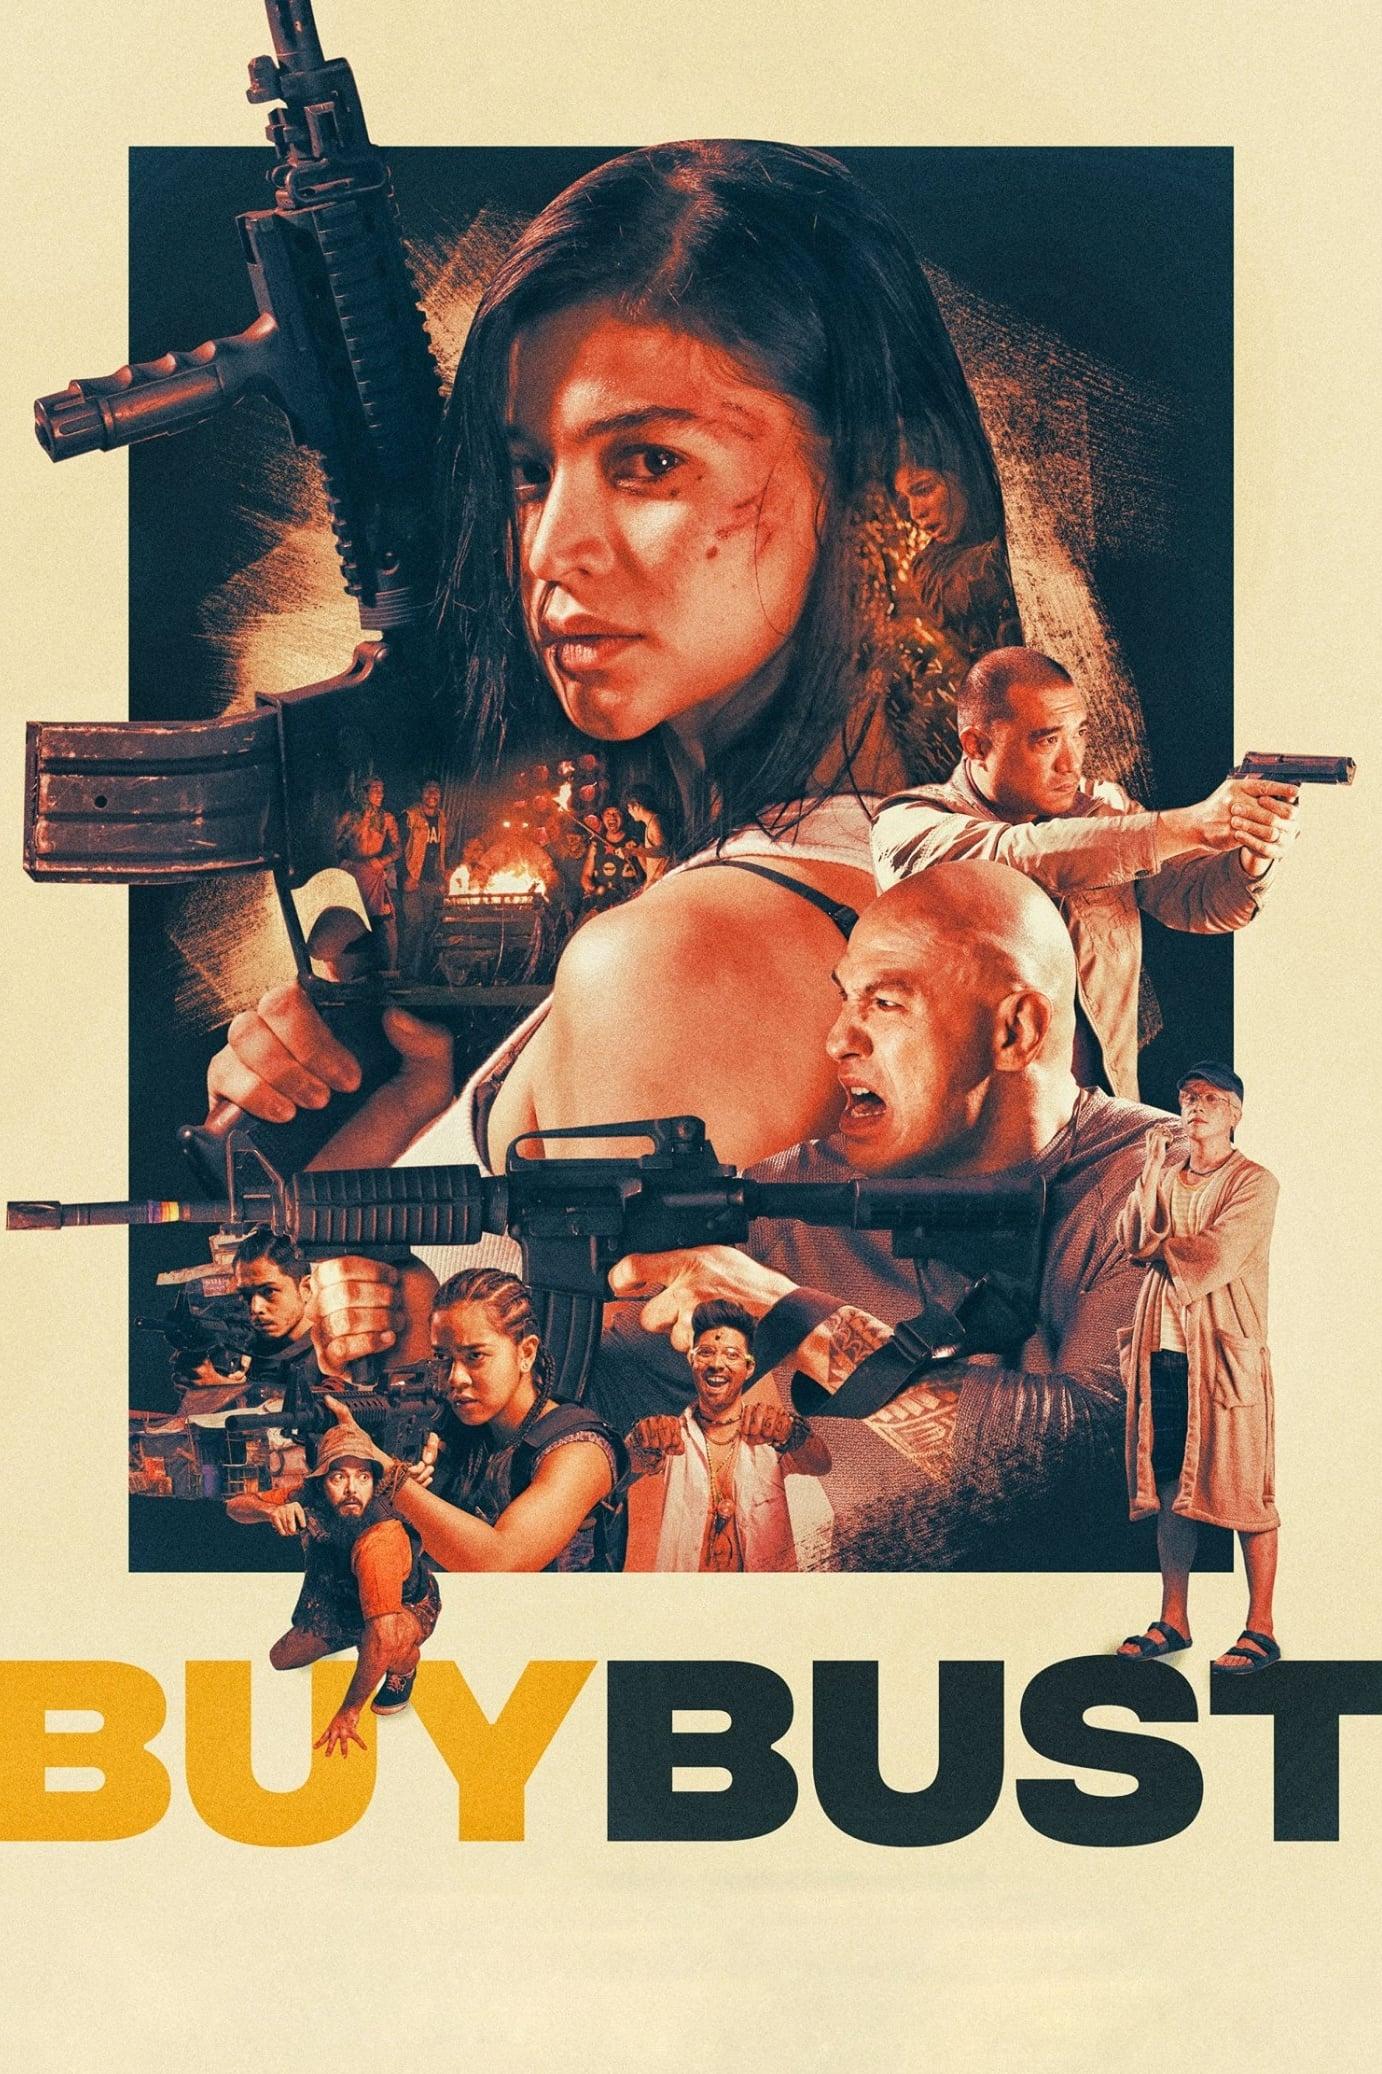 BuyBust poster